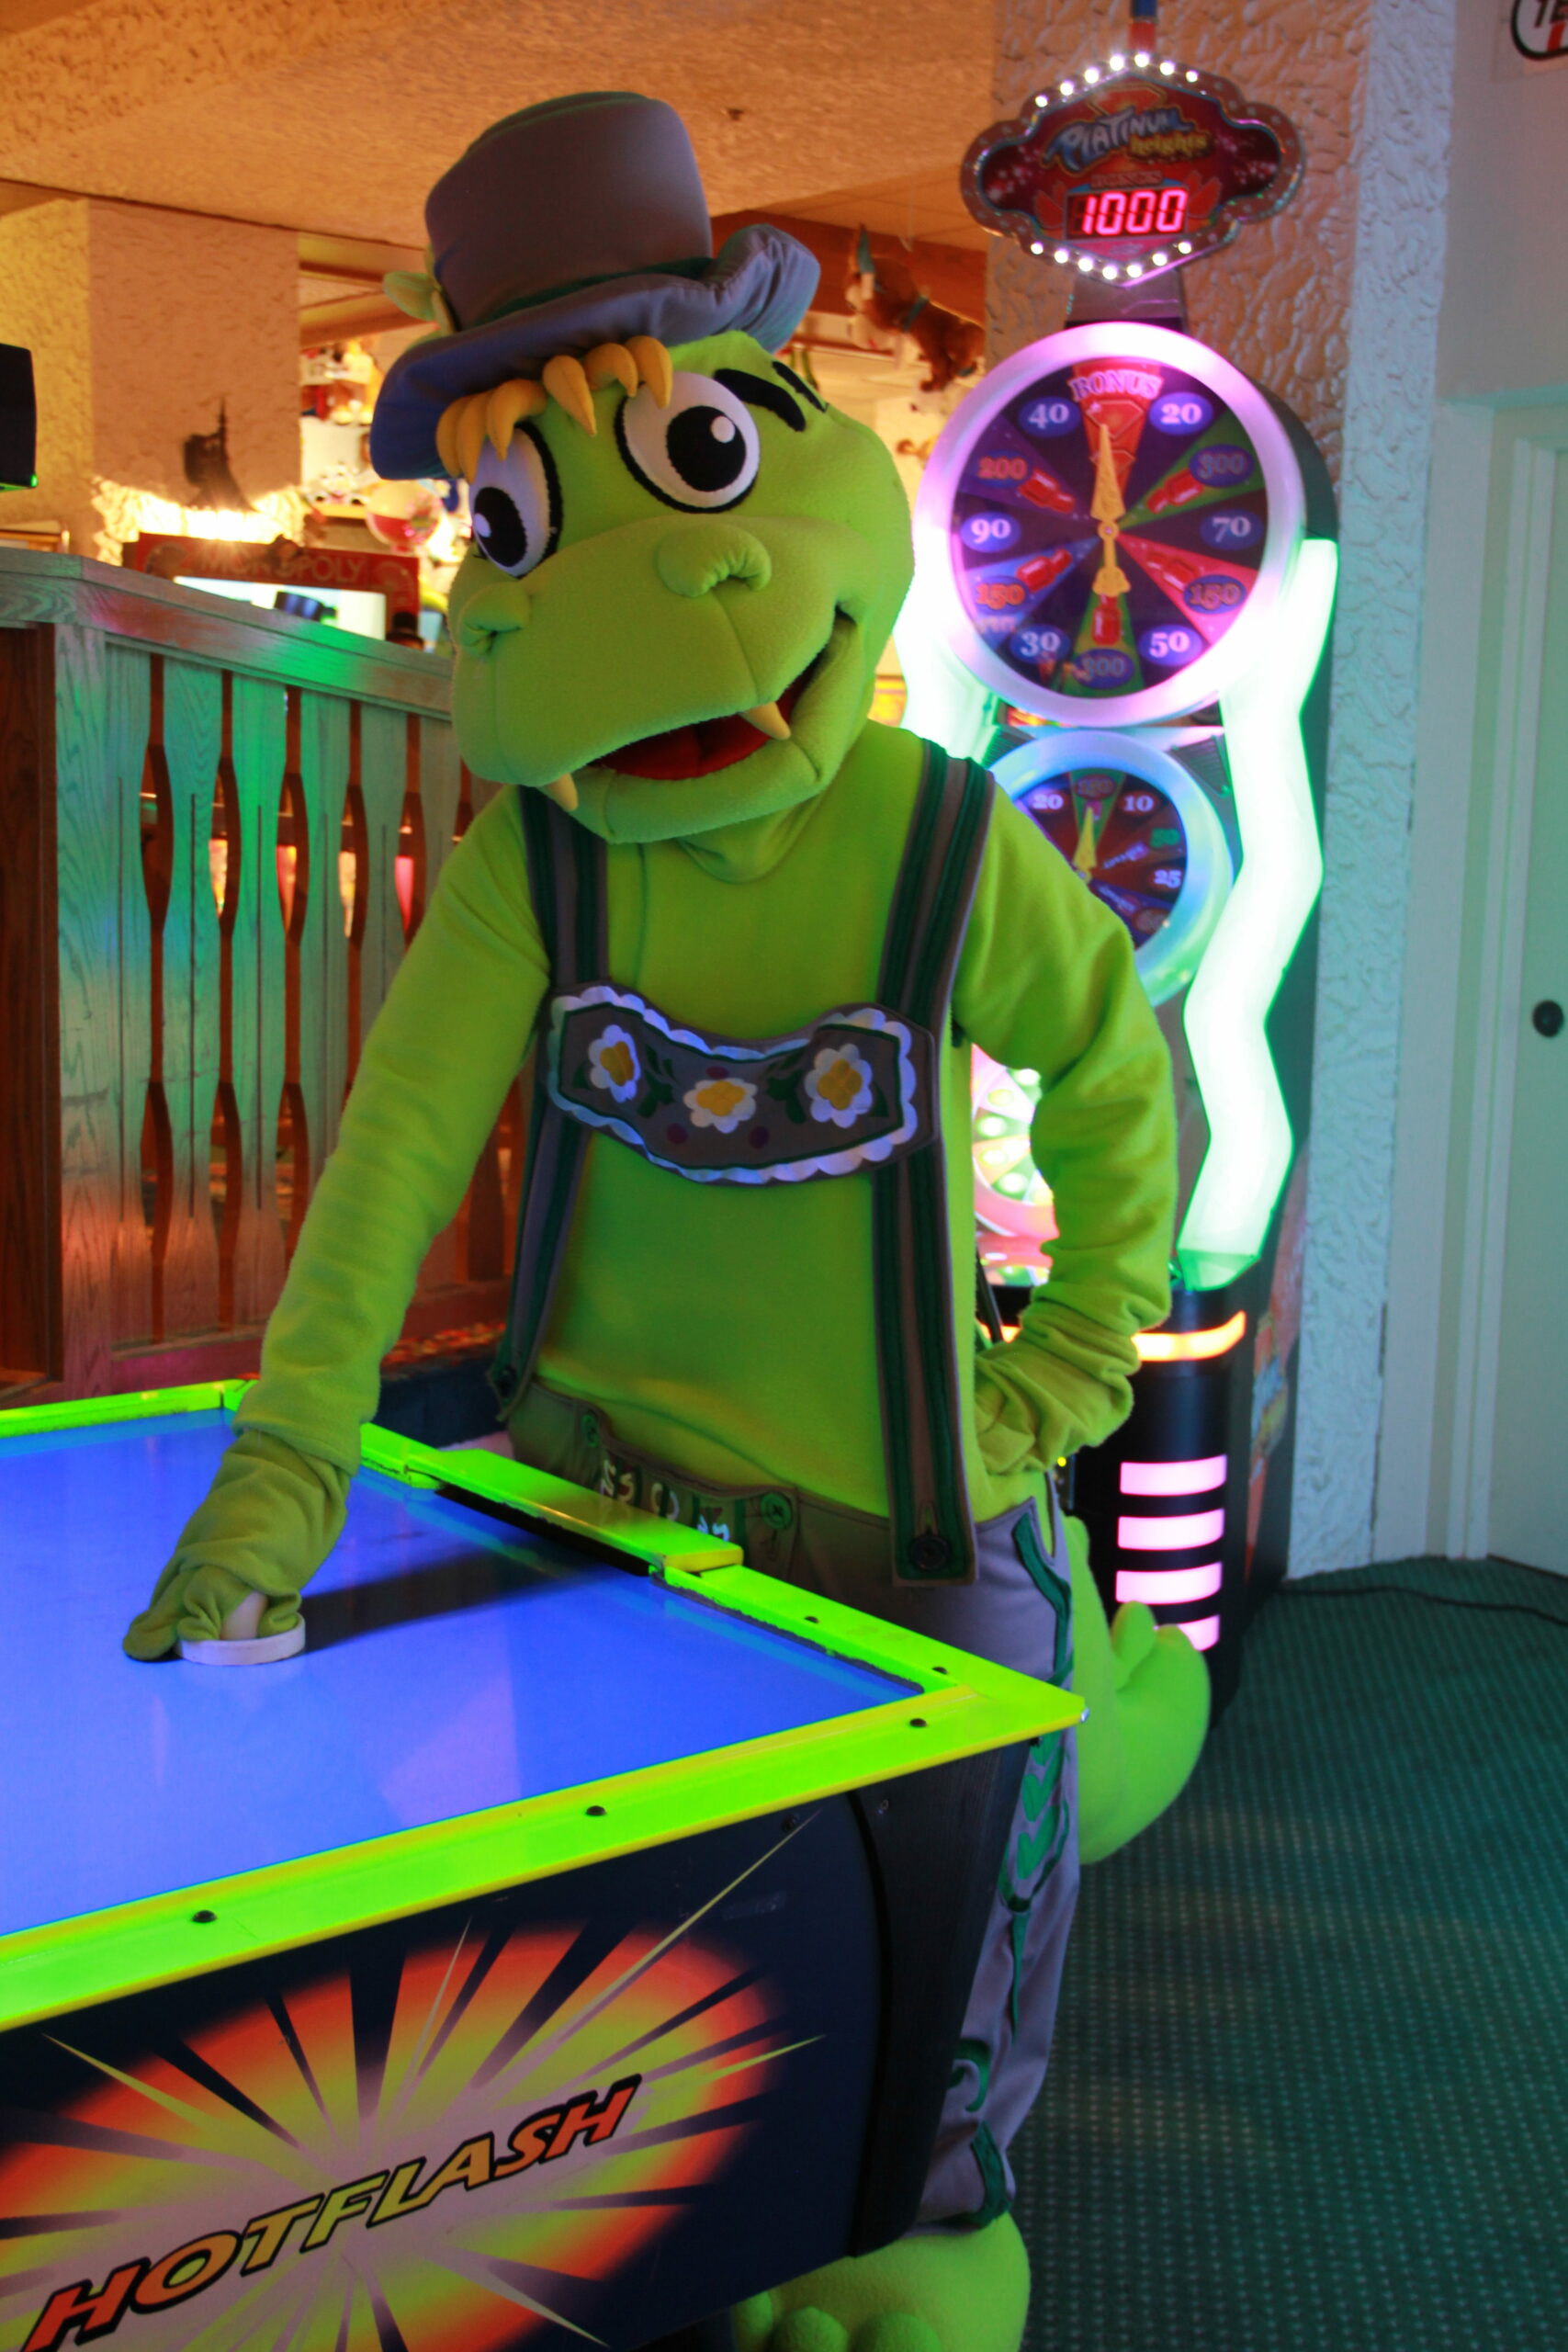 Willy plays Air Hockey